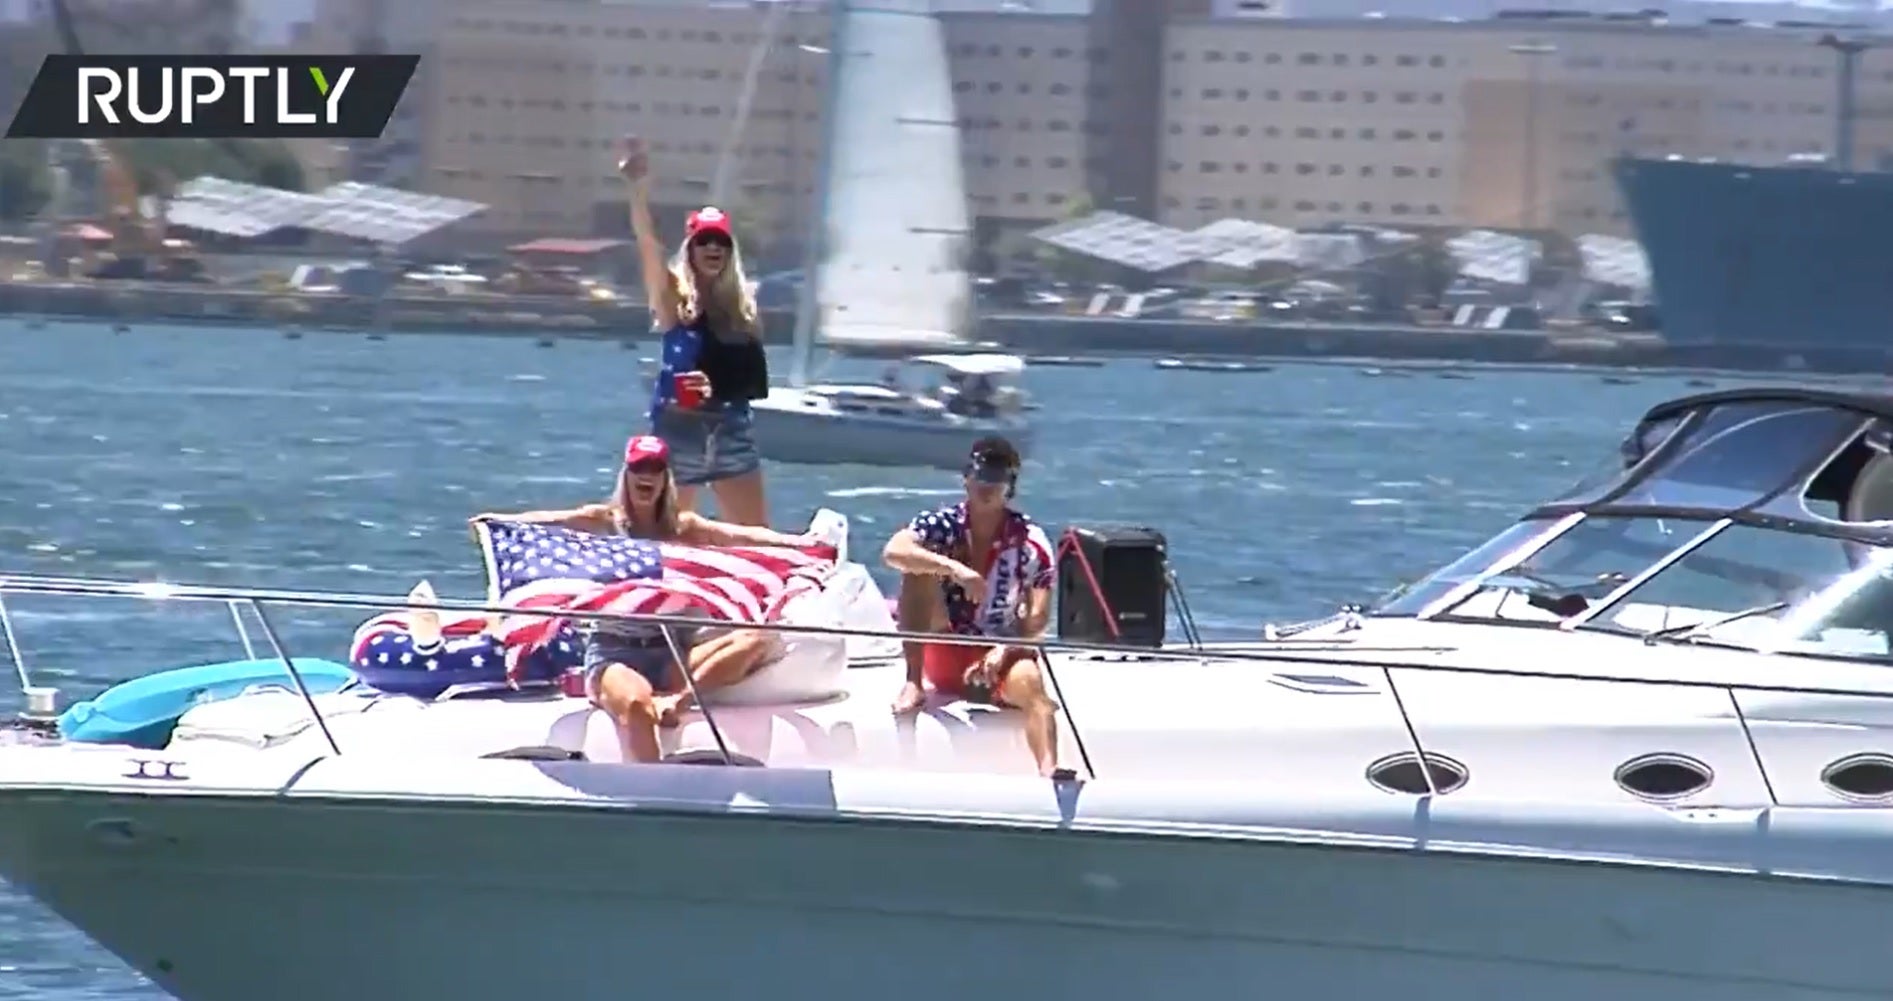 Supporters of former President Donald Trump celebrating his 75th birthday during a ‘Trumparilla MAGA Fest’ boat parade in San Diego on 13 June 2021